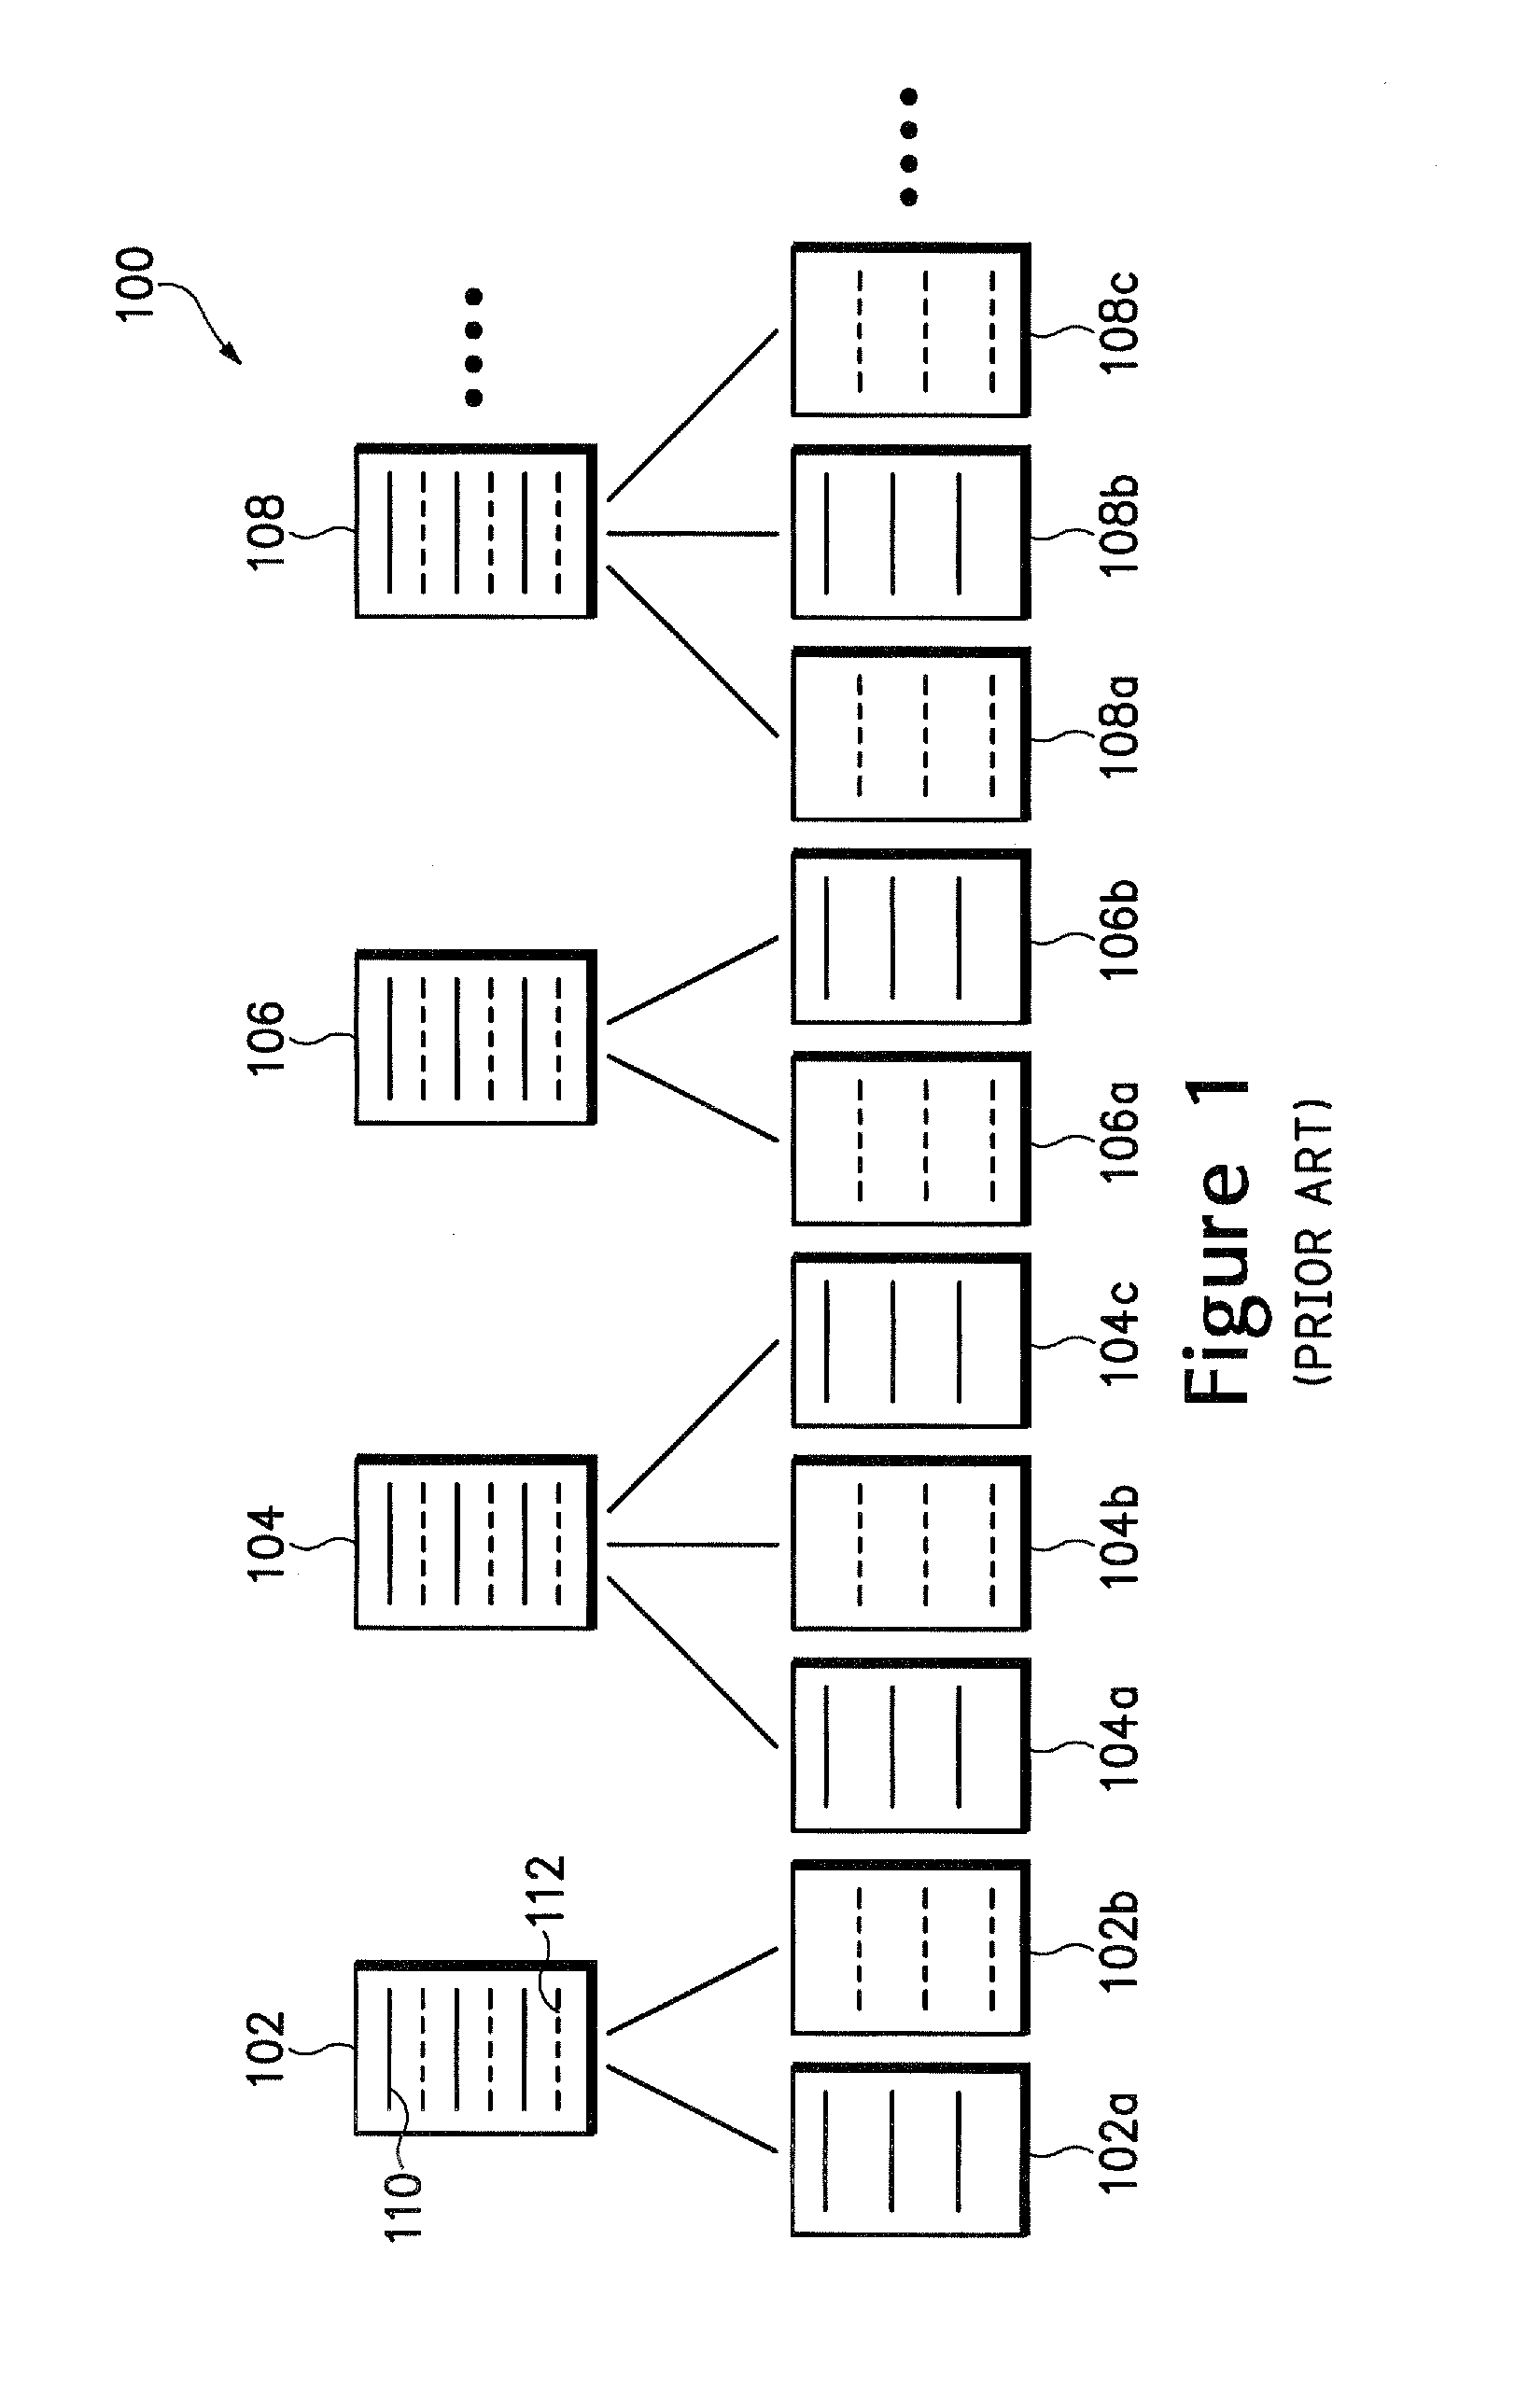 System and method for detecting a non-video source in video signals